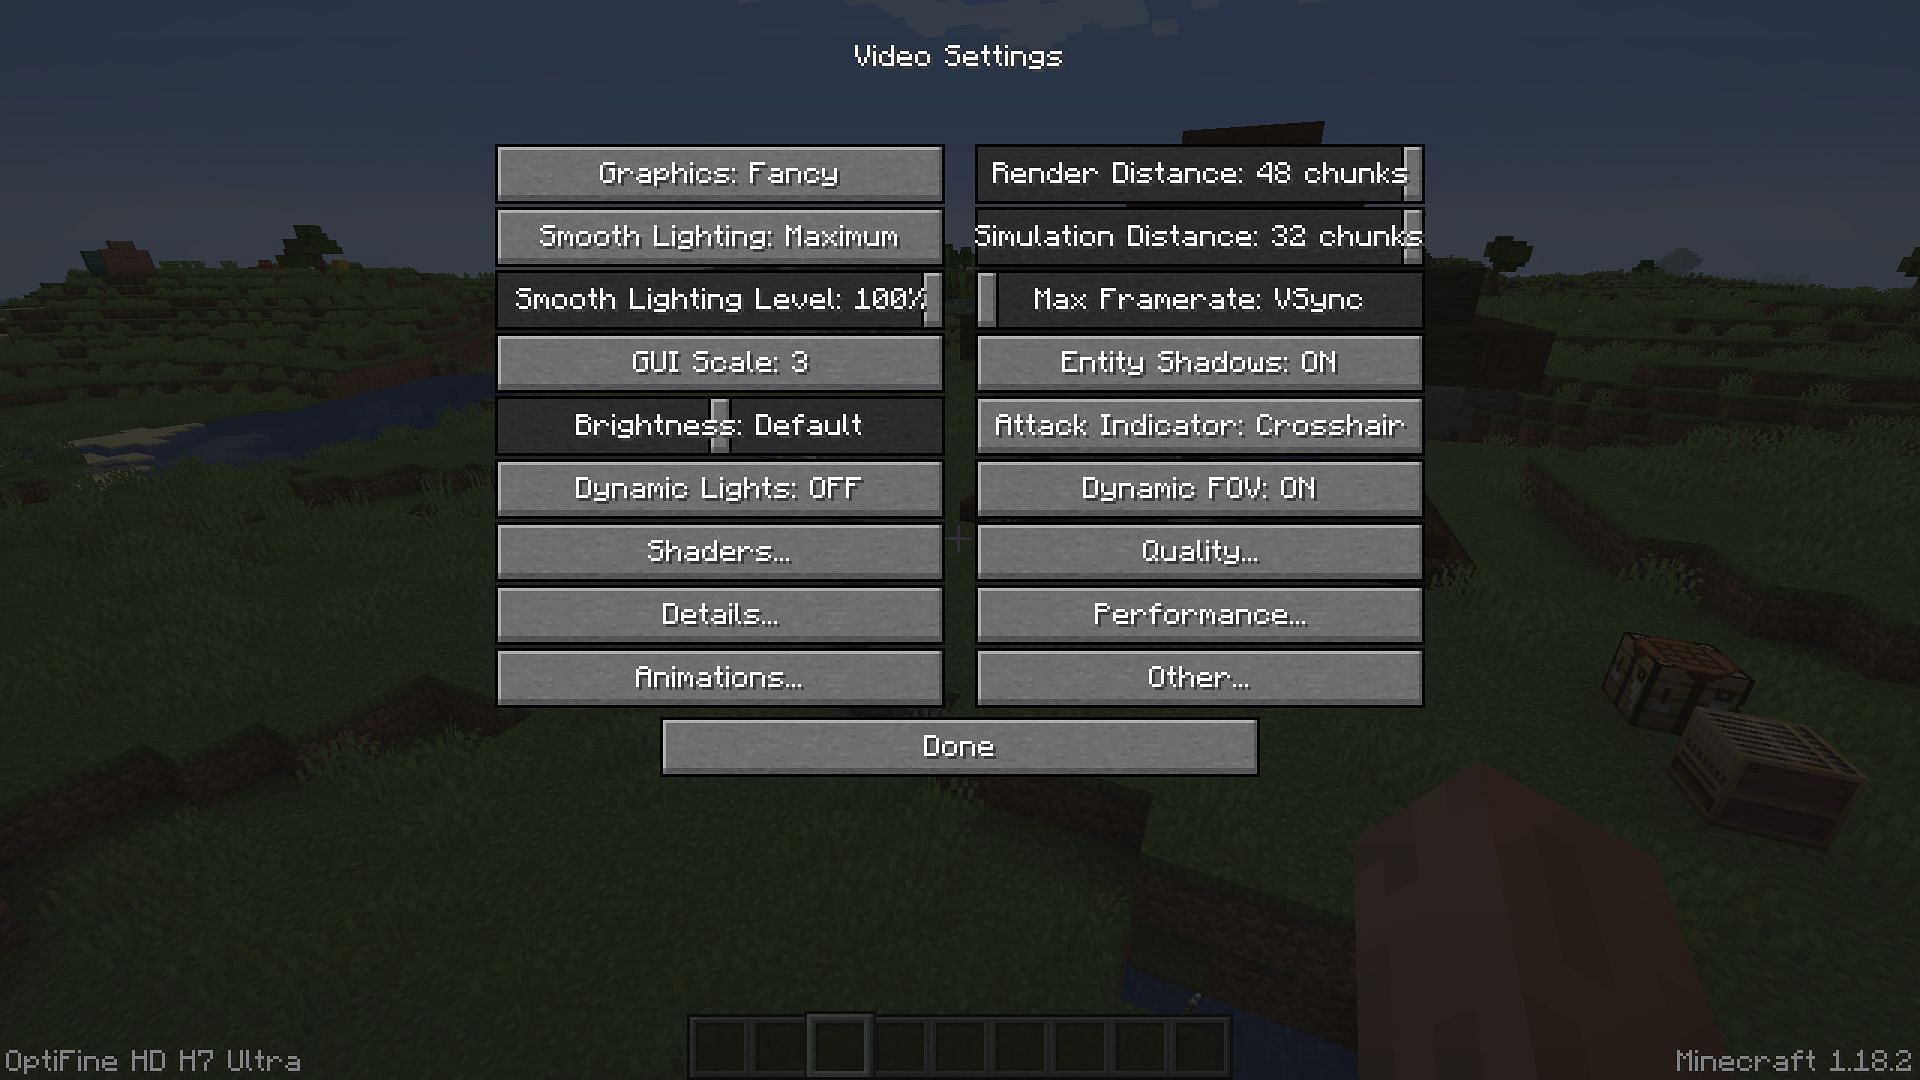 Is higher simulation distance better in Minecraft? - Quora